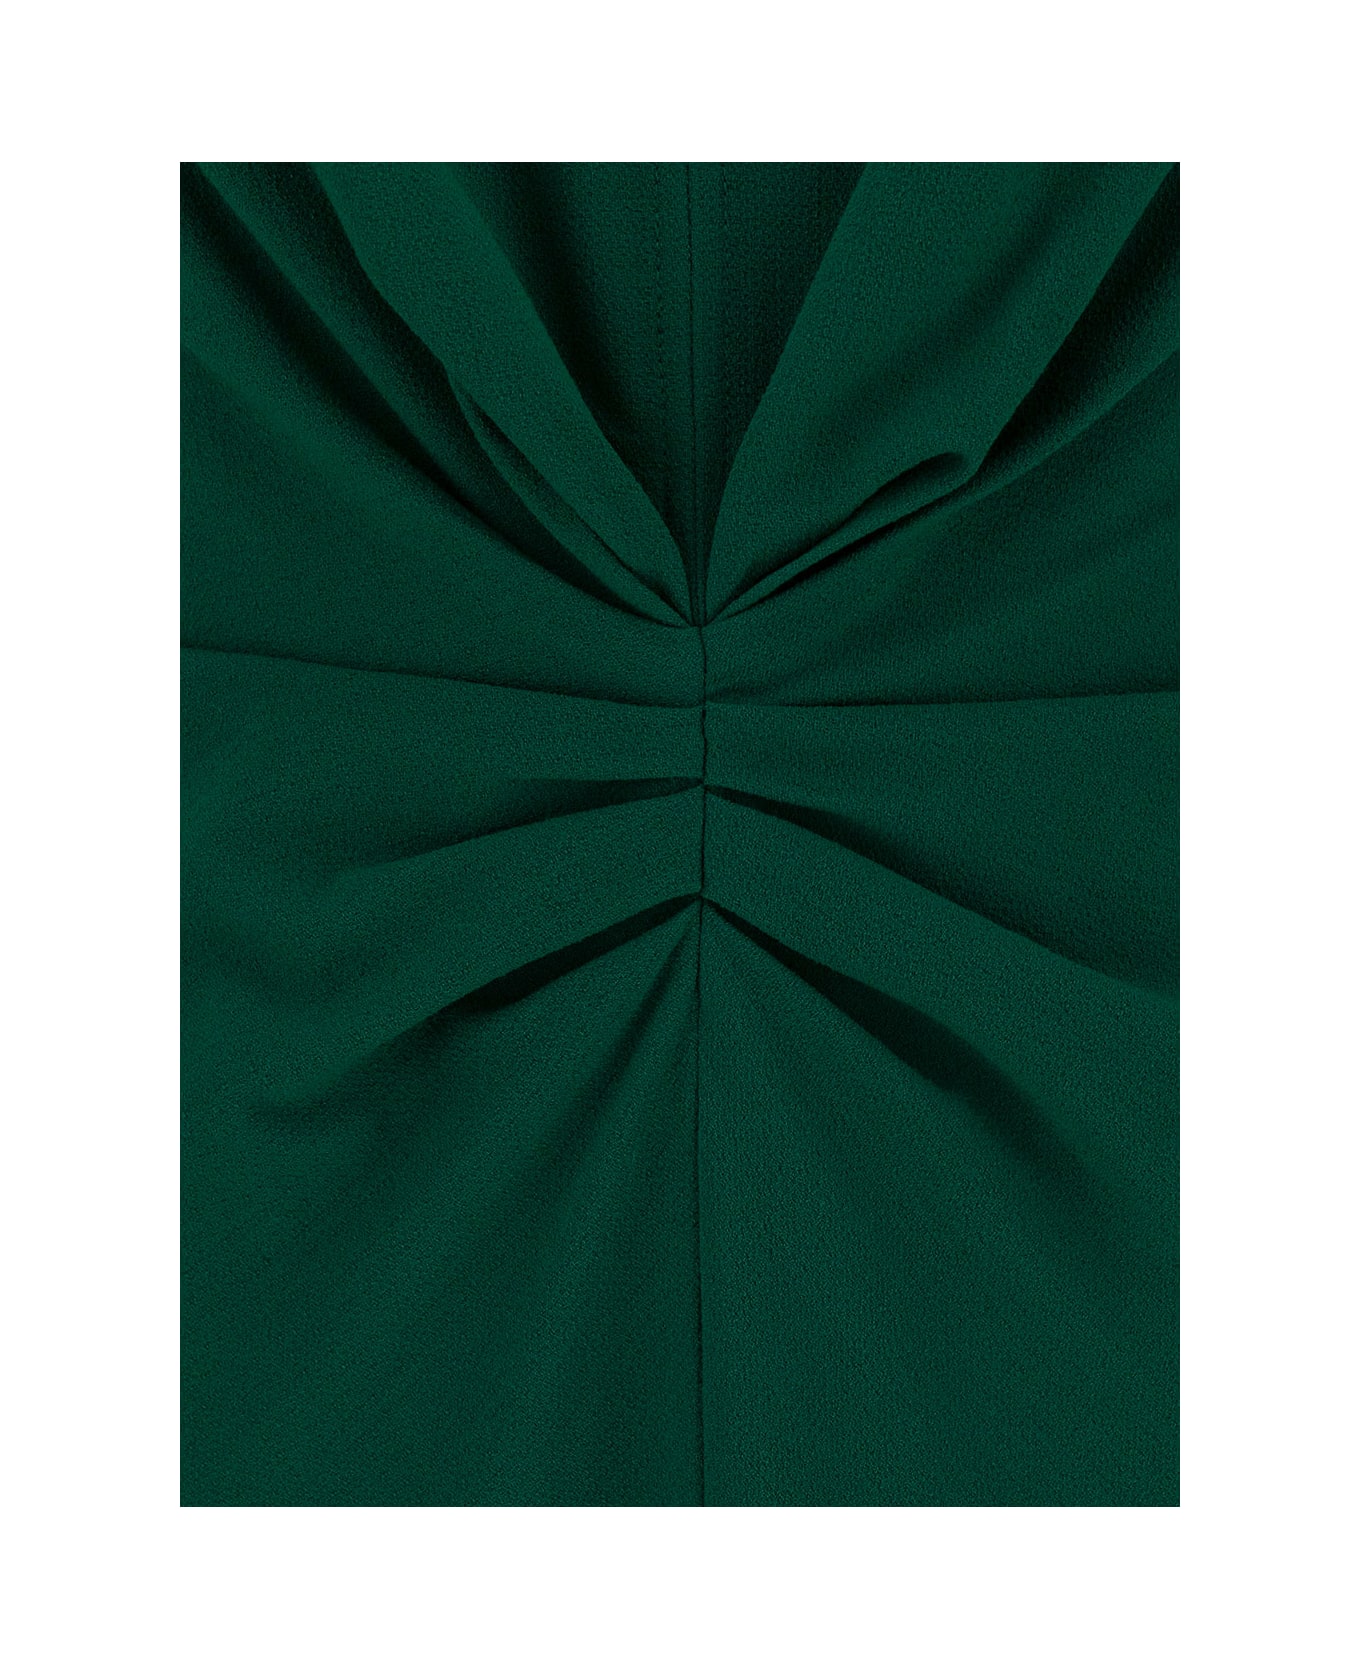 Victoria Beckham Midi Green Dress With Gatherings In Wool Blend Woman - Green